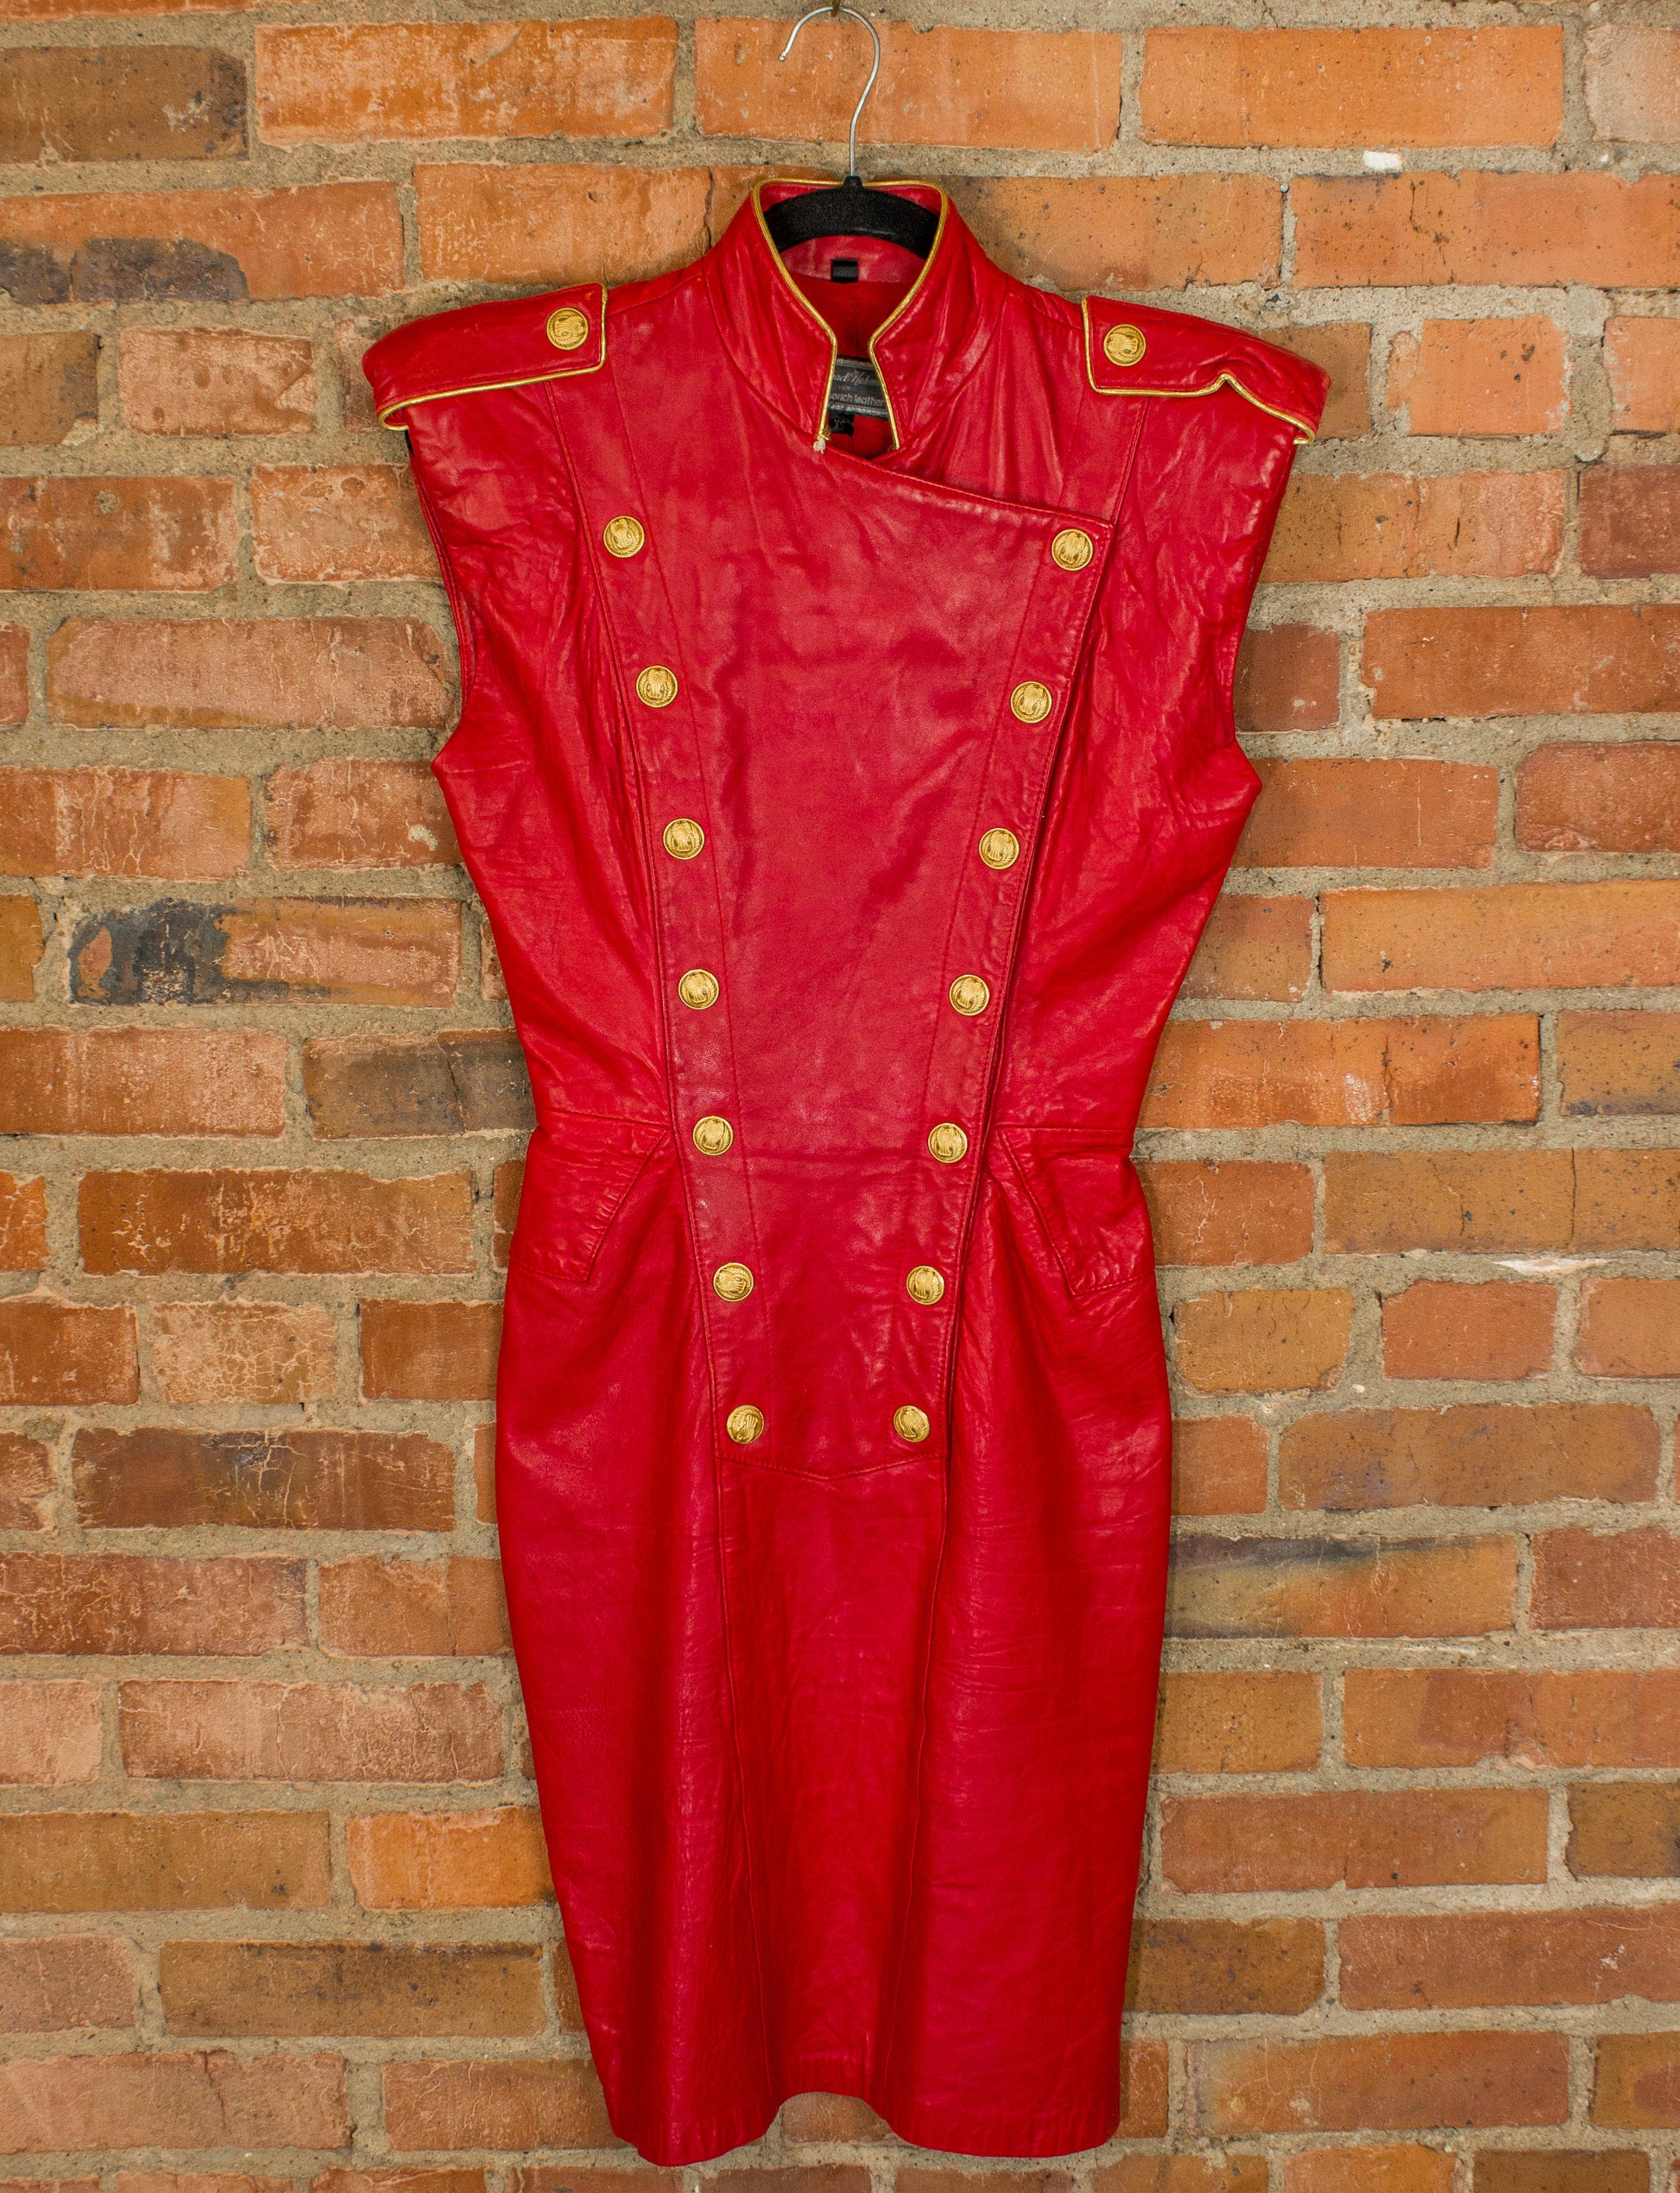 Vintage 80s Michael Hoban for North Beach Leather Red Dress With Gold Buttons Size XS